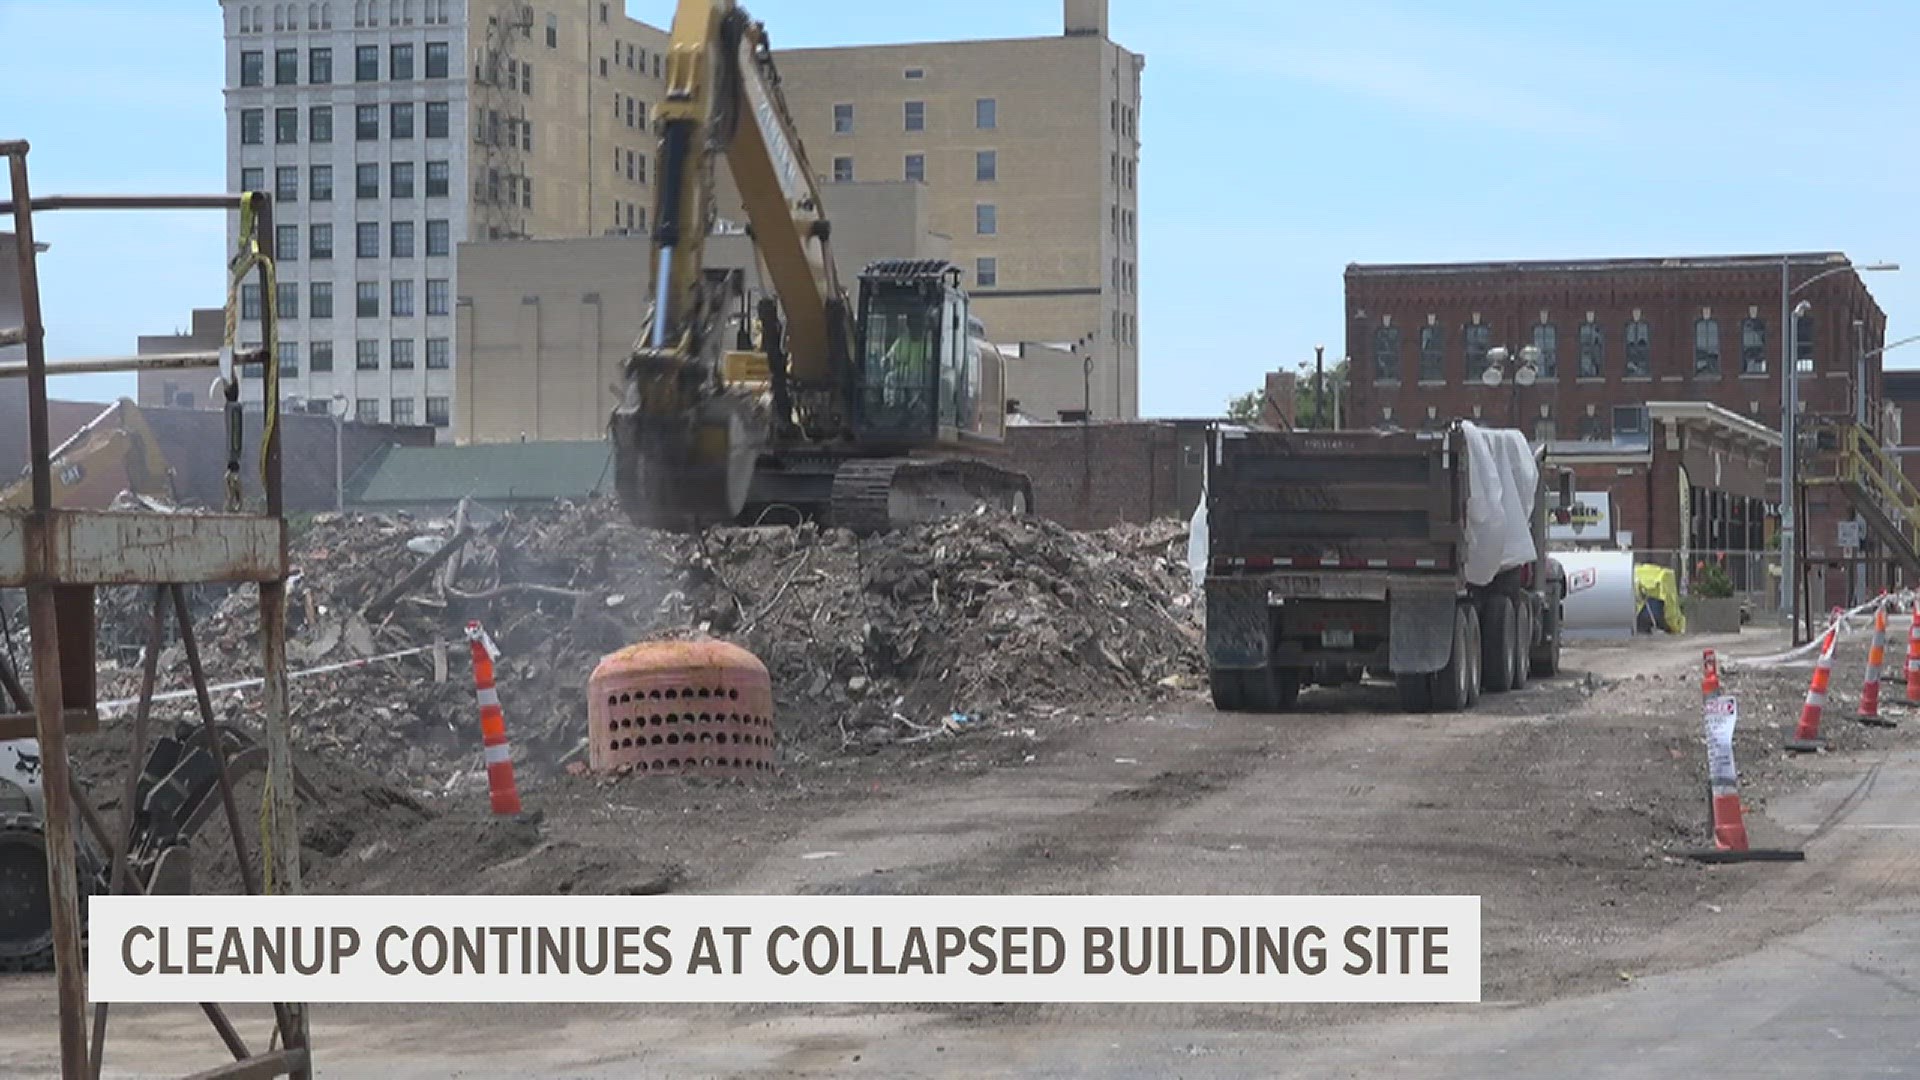 Concerns are growing over collapse-related costs as the city has approved about $2M for demolition and cleanup.